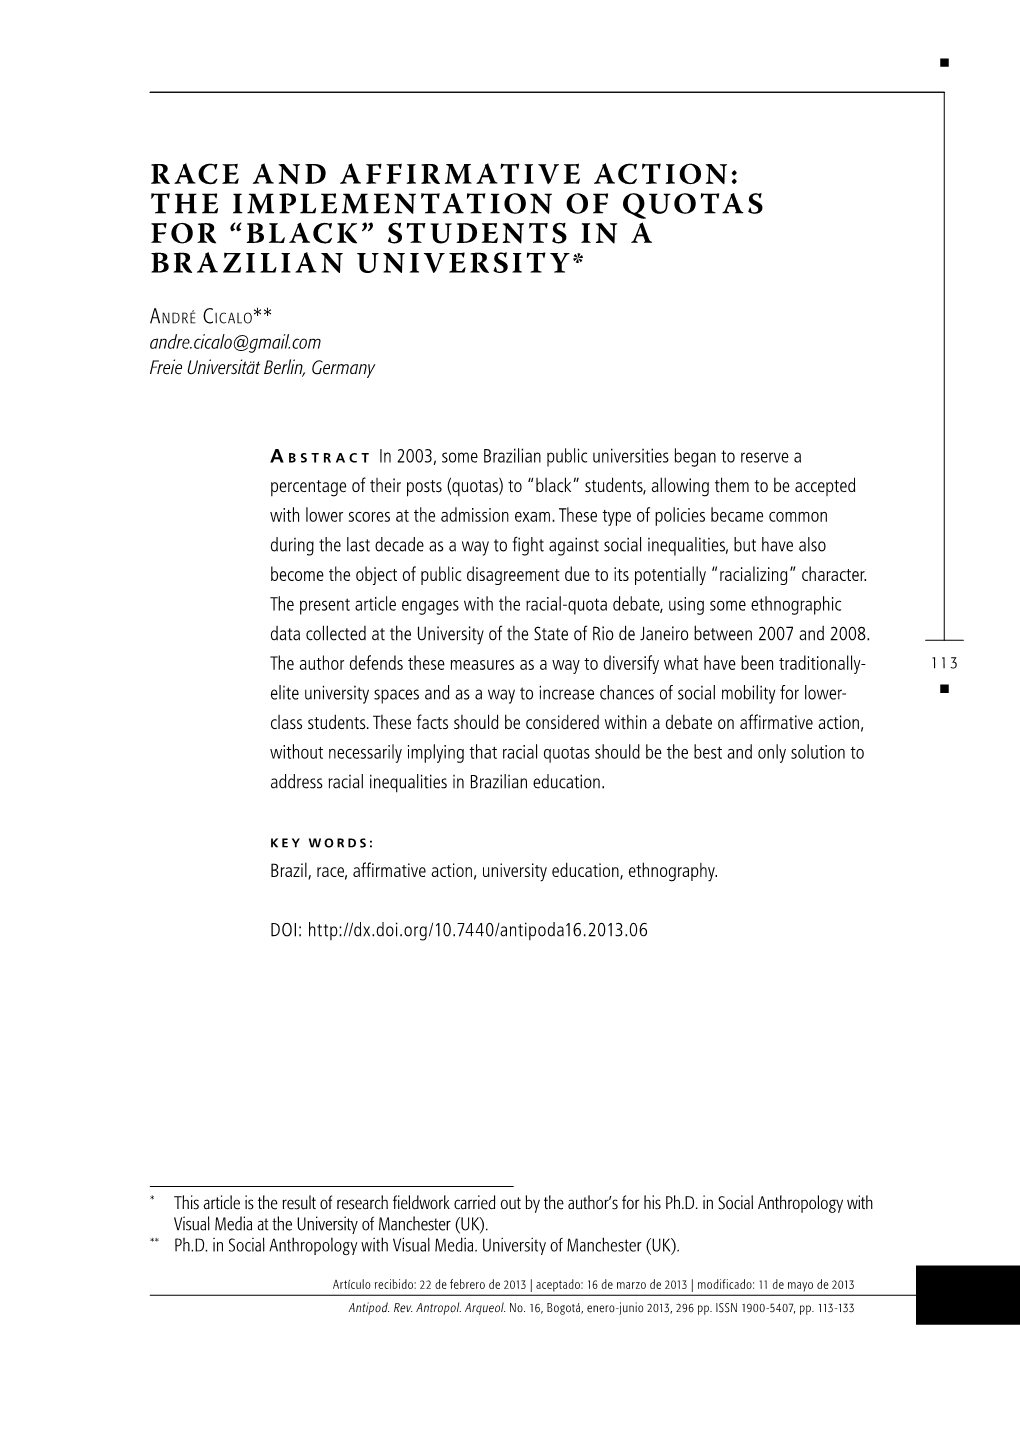 Race and Affirmative Action: the Implementation of Quotas for “Black” Students in a Brazilian University*